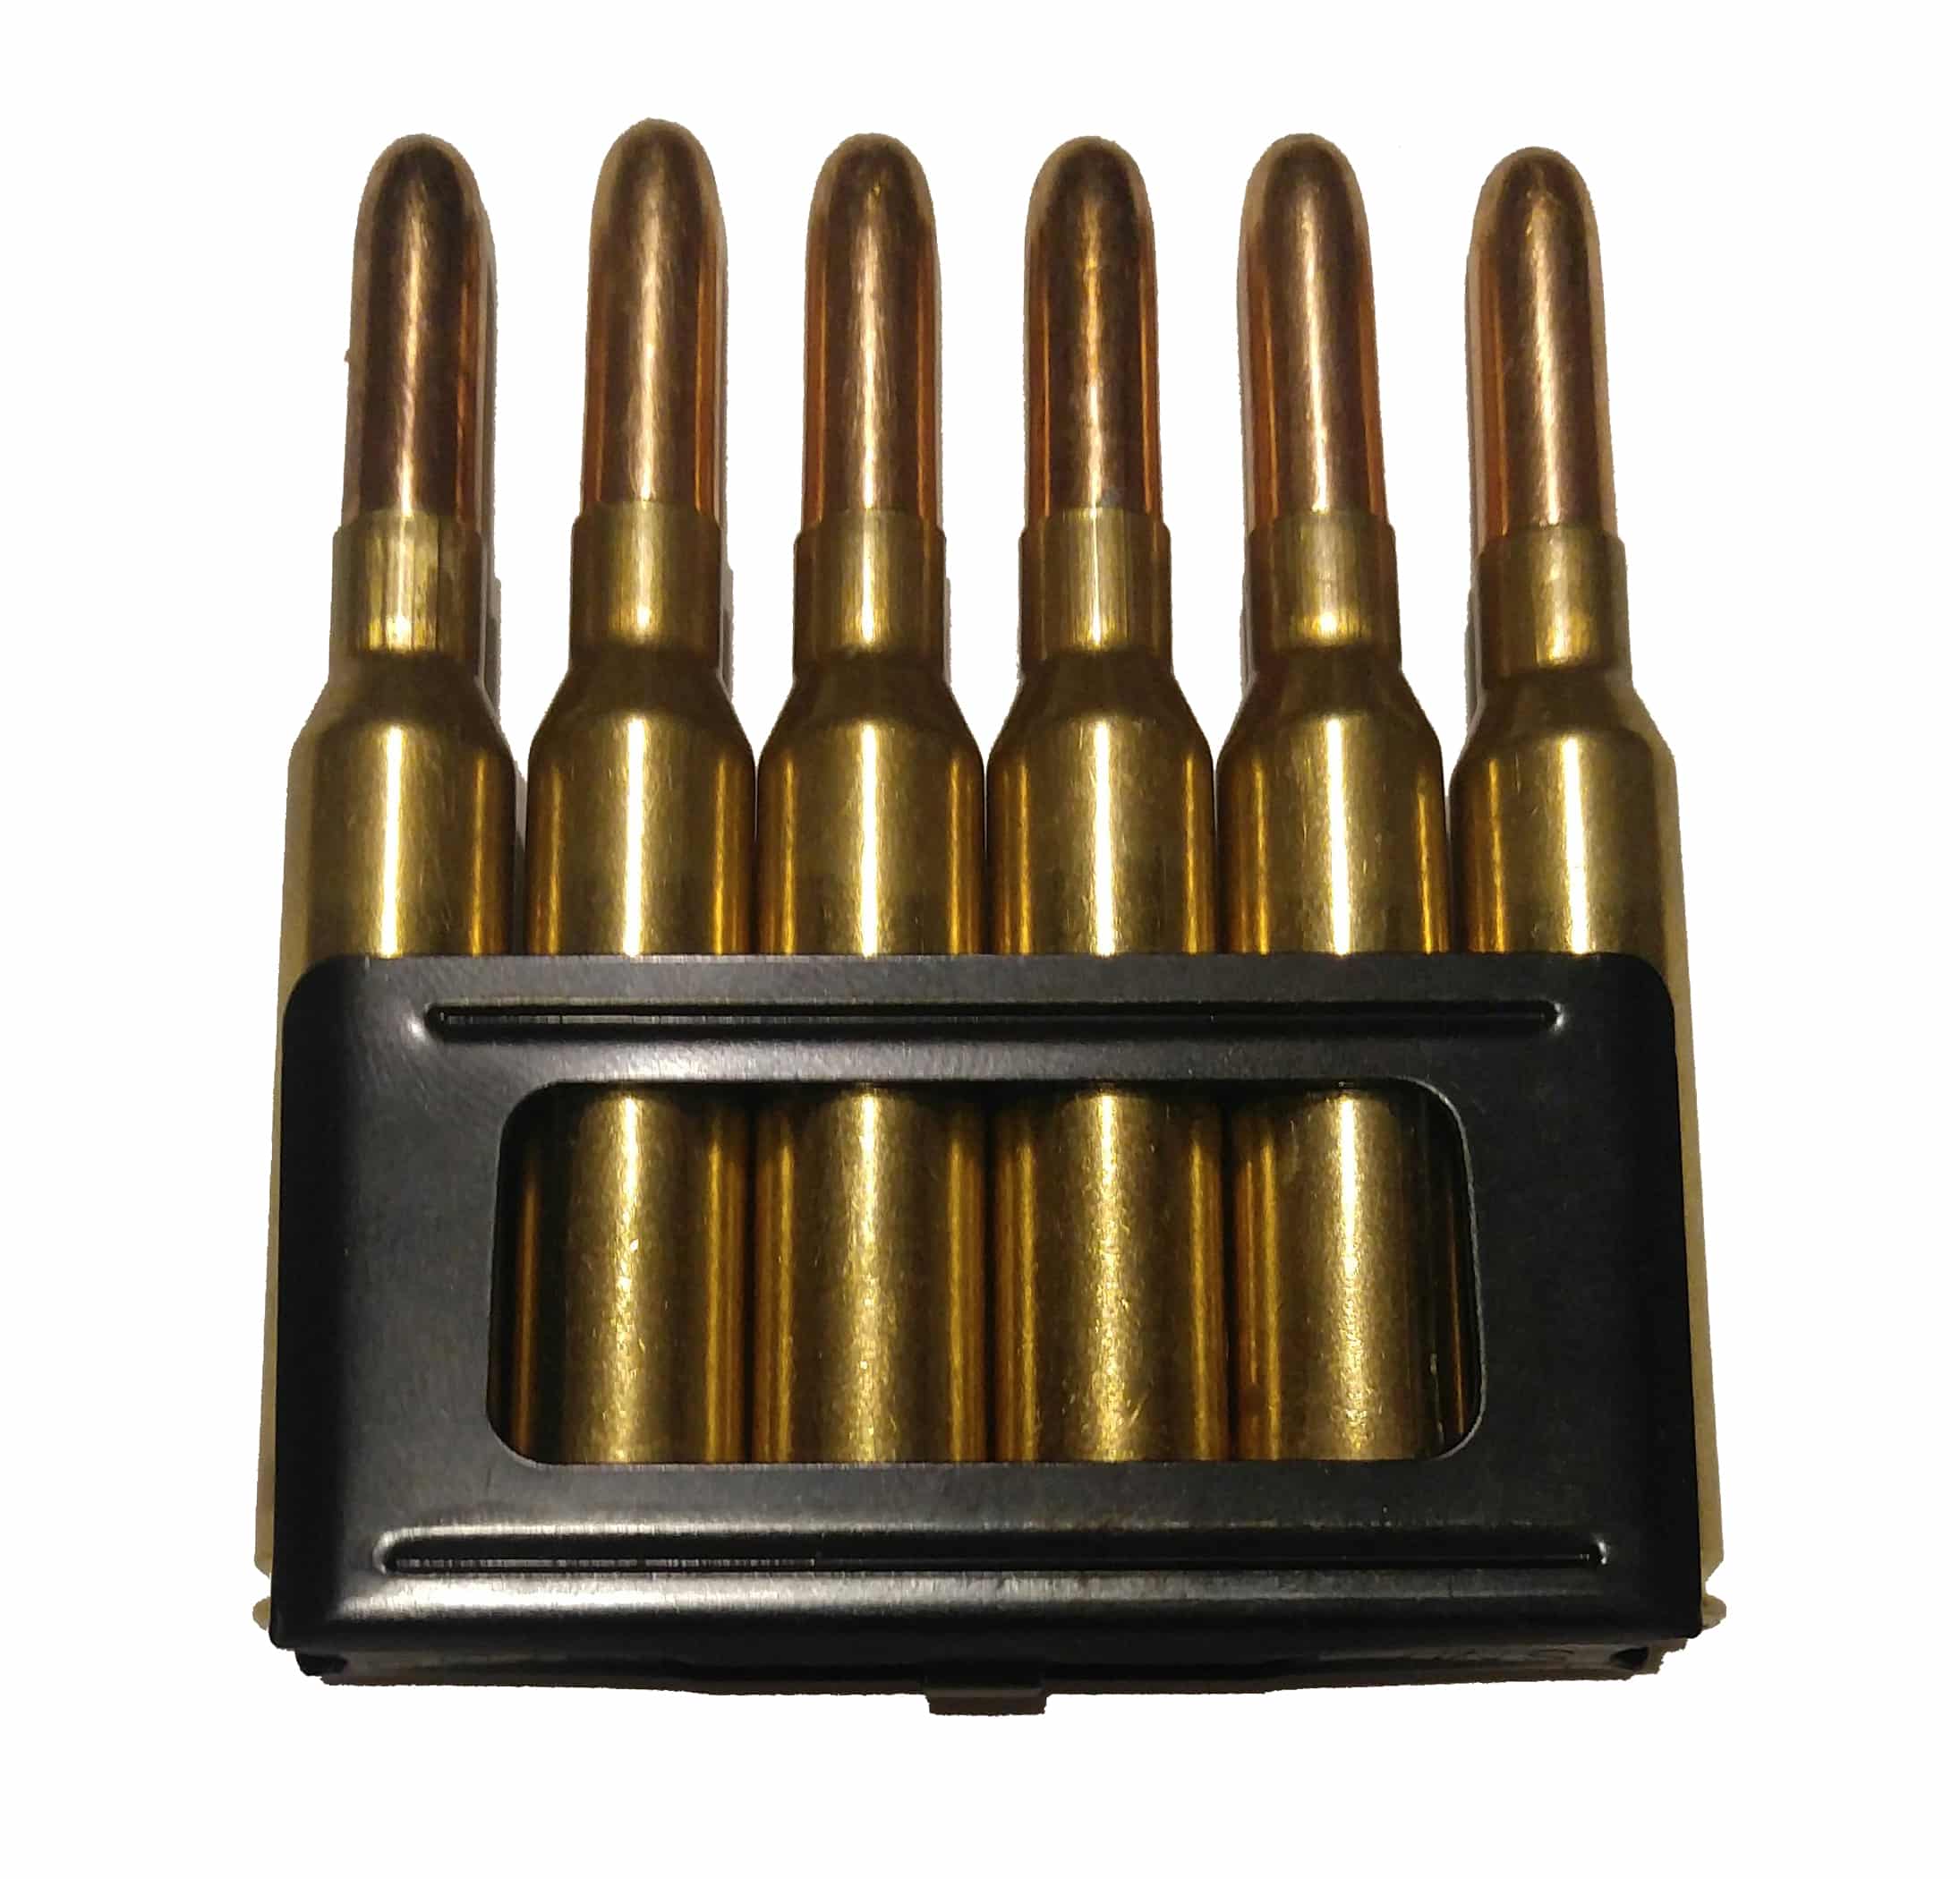 6.5x52 Carcano Snap Caps & Enbloc Clip Italian WWI WWII Dummy Rounds 